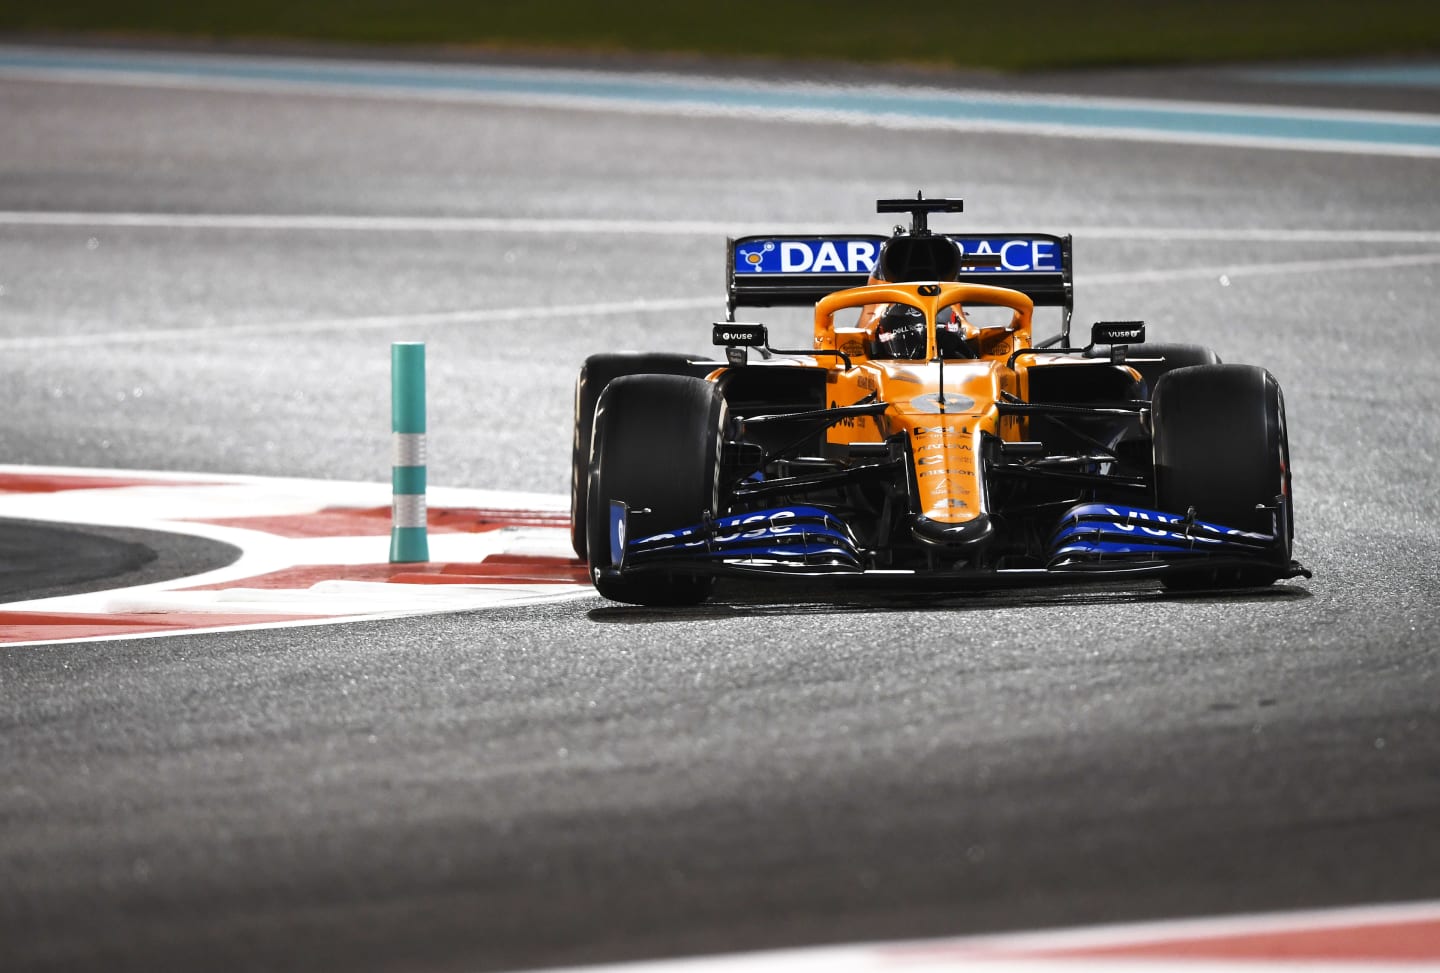 ABU DHABI, UNITED ARAB EMIRATES - DECEMBER 13: Carlos Sainz of Spain driving the (55) McLaren F1 Team MCL35 Renault during the F1 Grand Prix of Abu Dhabi at Yas Marina Circuit on December 13, 2020 in Abu Dhabi, United Arab Emirates. (Photo by Rudy Carezzevoli/Getty Images)